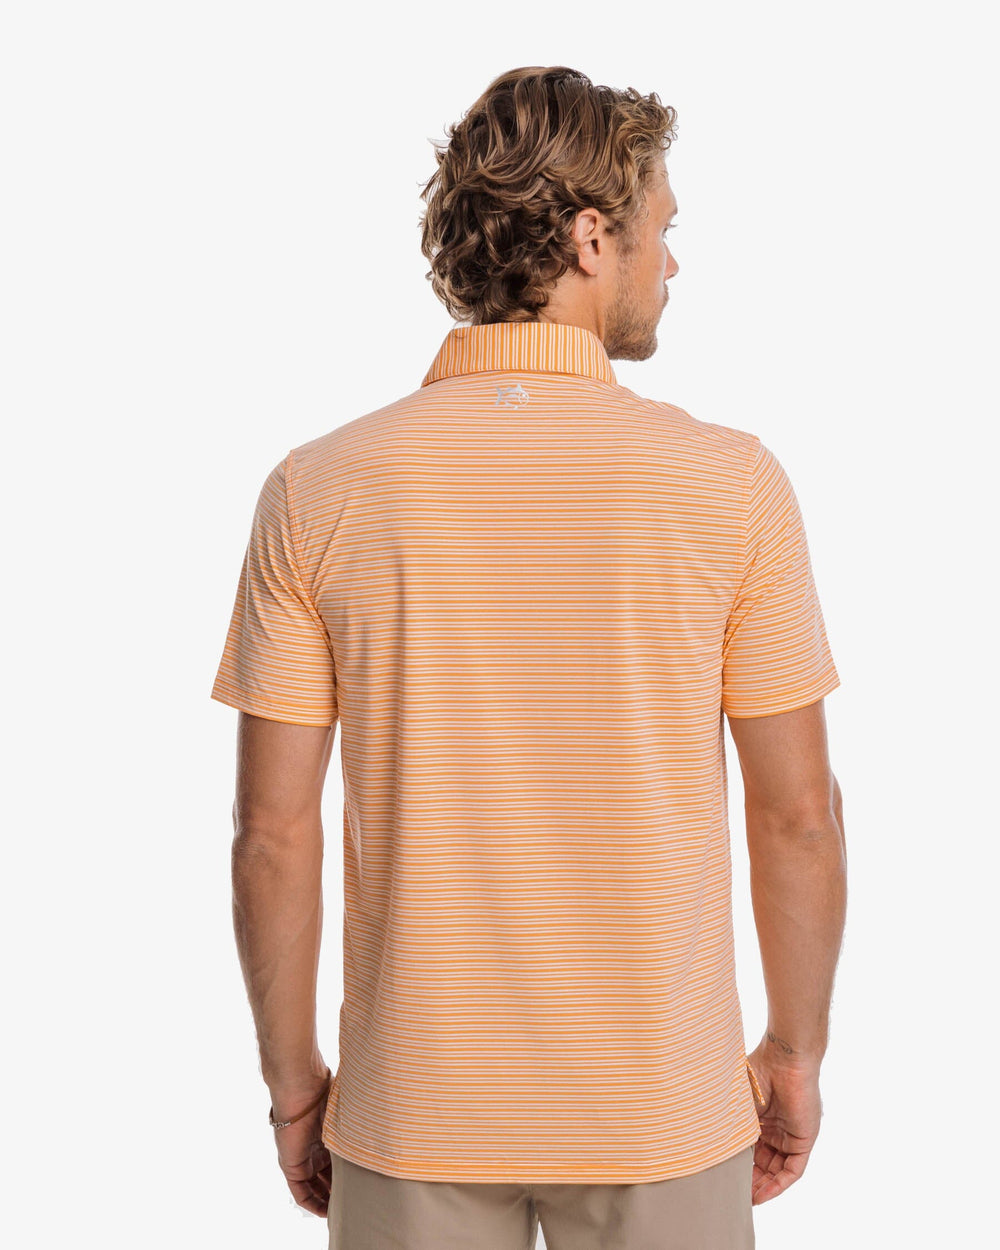 The back view of the Southern Tide brrr-eeze Millwood Stripe Performance Polo Shirt by Southern Tide - Horizon